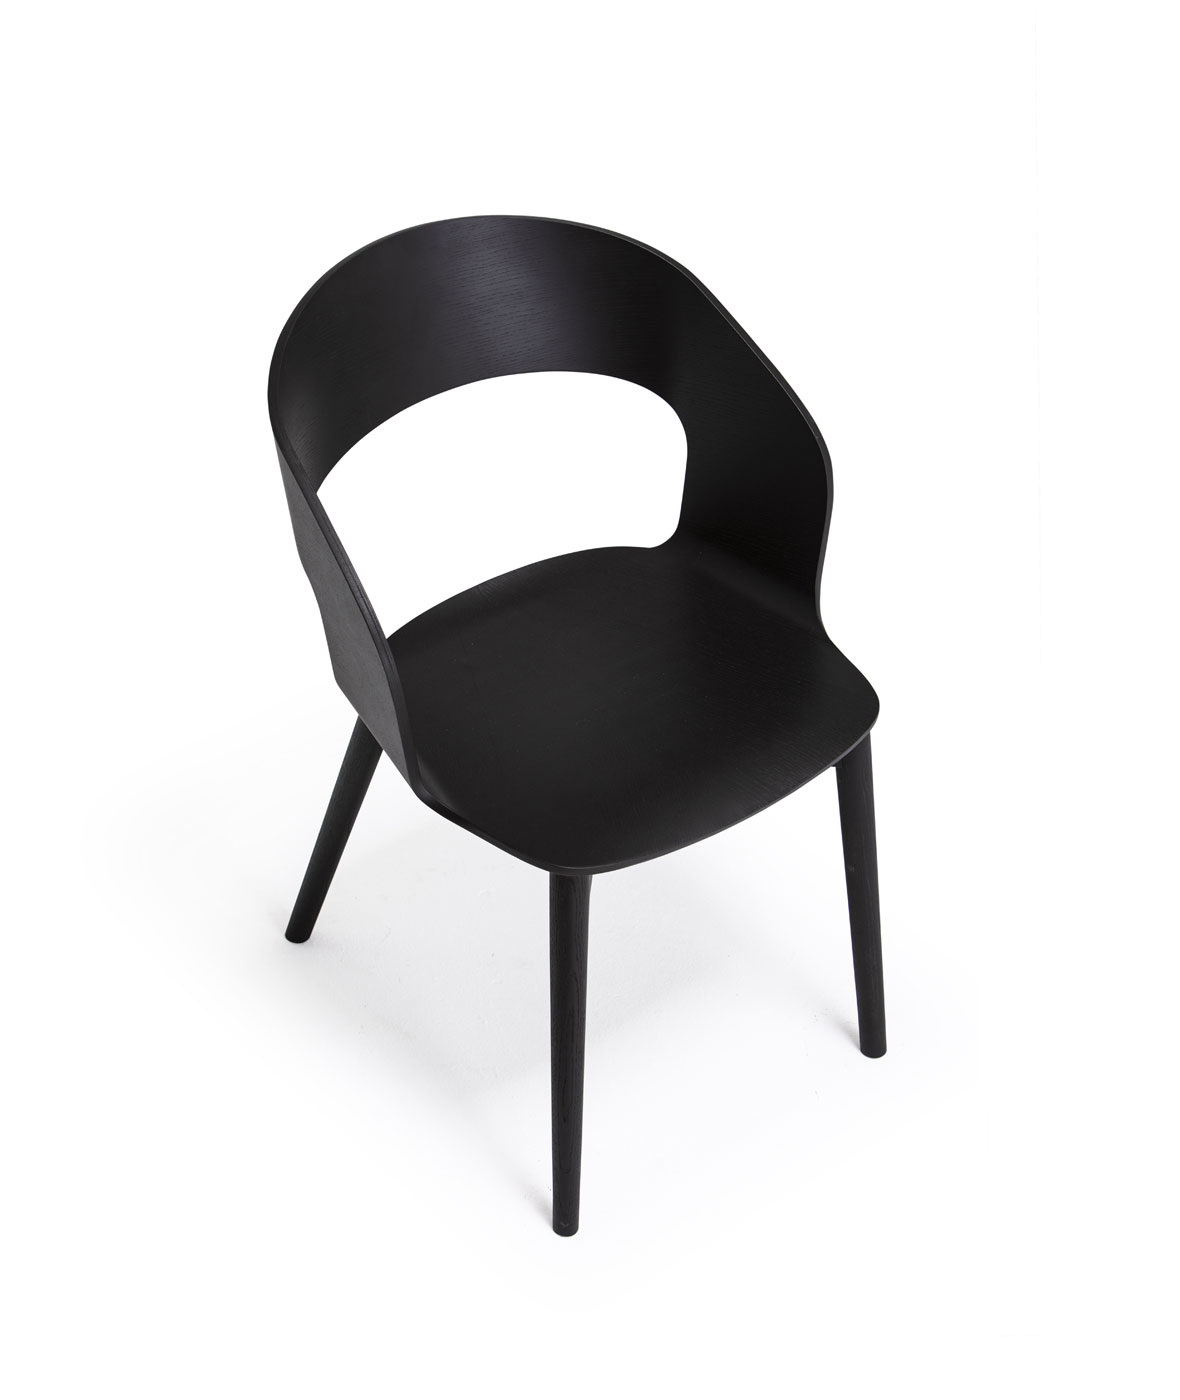 Goose chair Model B with wooden armrests and legs - Vergés